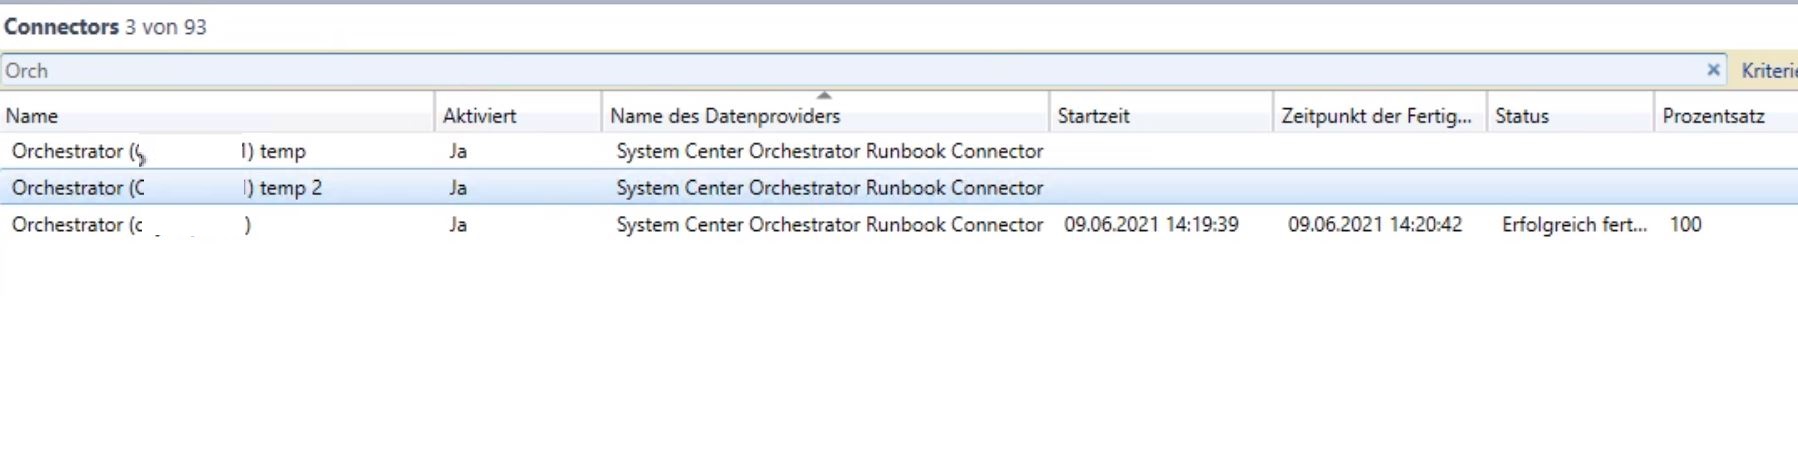 103923-orchestrator-connector-overview.jpg